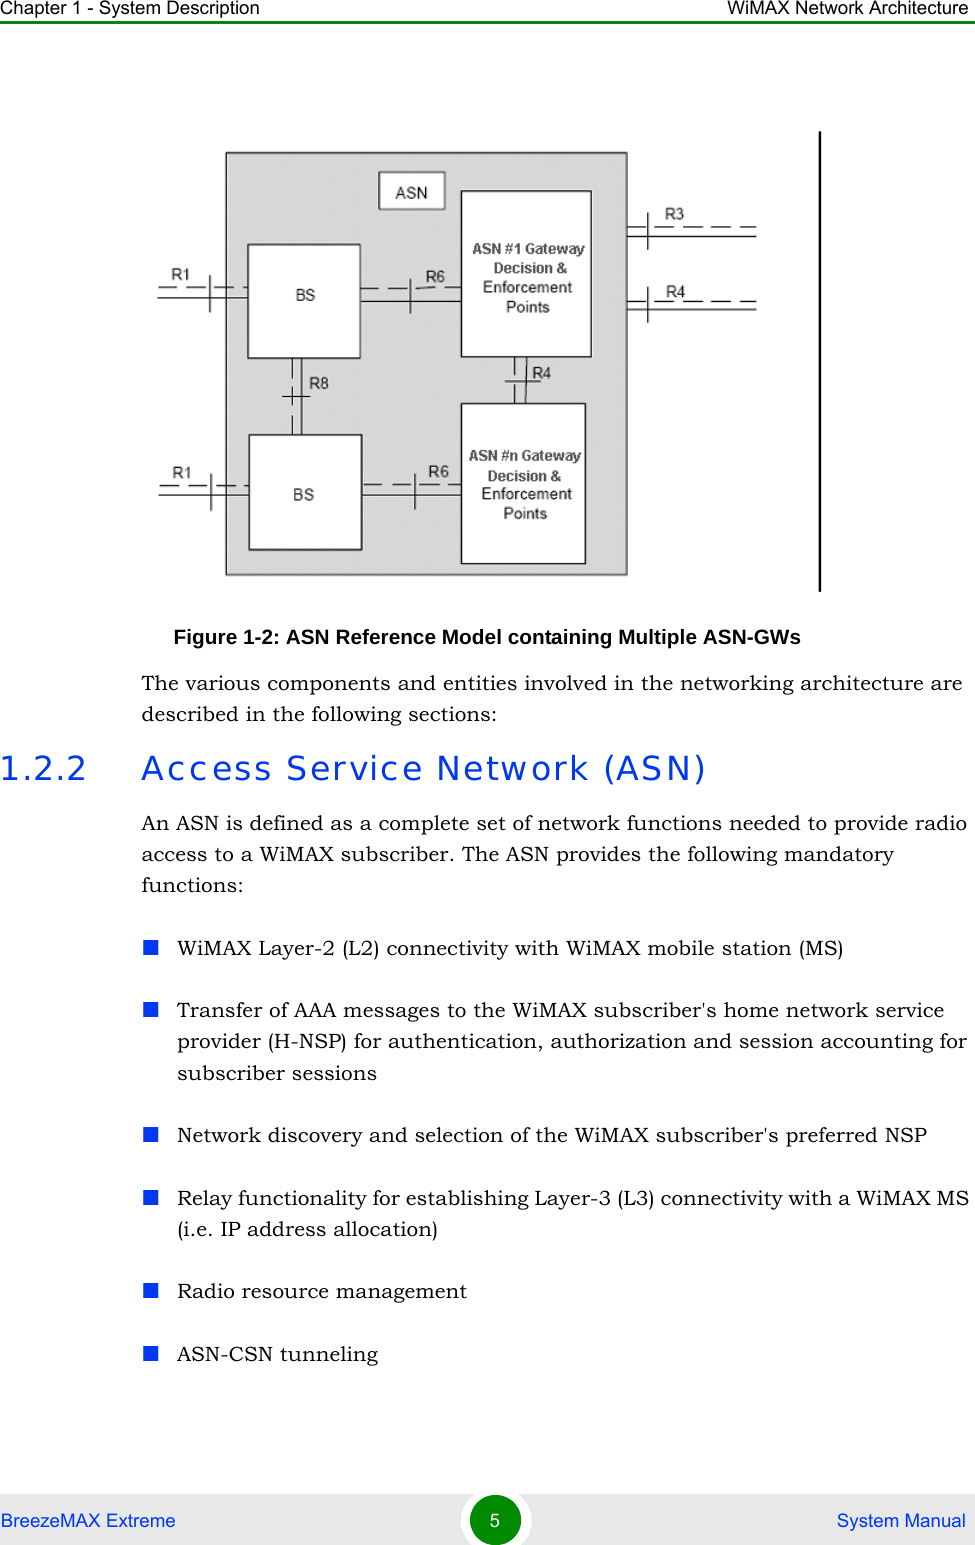 Chapter 1 - System Description WiMAX Network ArchitectureBreezeMAX Extreme 5 System Manual The various components and entities involved in the networking architecture are described in the following sections:1.2.2 Access Service Network (ASN)An ASN is defined as a complete set of network functions needed to provide radio access to a WiMAX subscriber. The ASN provides the following mandatory functions:WiMAX Layer-2 (L2) connectivity with WiMAX mobile station (MS) Transfer of AAA messages to the WiMAX subscriber&apos;s home network service provider (H-NSP) for authentication, authorization and session accounting for subscriber sessionsNetwork discovery and selection of the WiMAX subscriber&apos;s preferred NSPRelay functionality for establishing Layer-3 (L3) connectivity with a WiMAX MS (i.e. IP address allocation)Radio resource managementASN-CSN tunnelingFigure 1-2: ASN Reference Model containing Multiple ASN-GWs